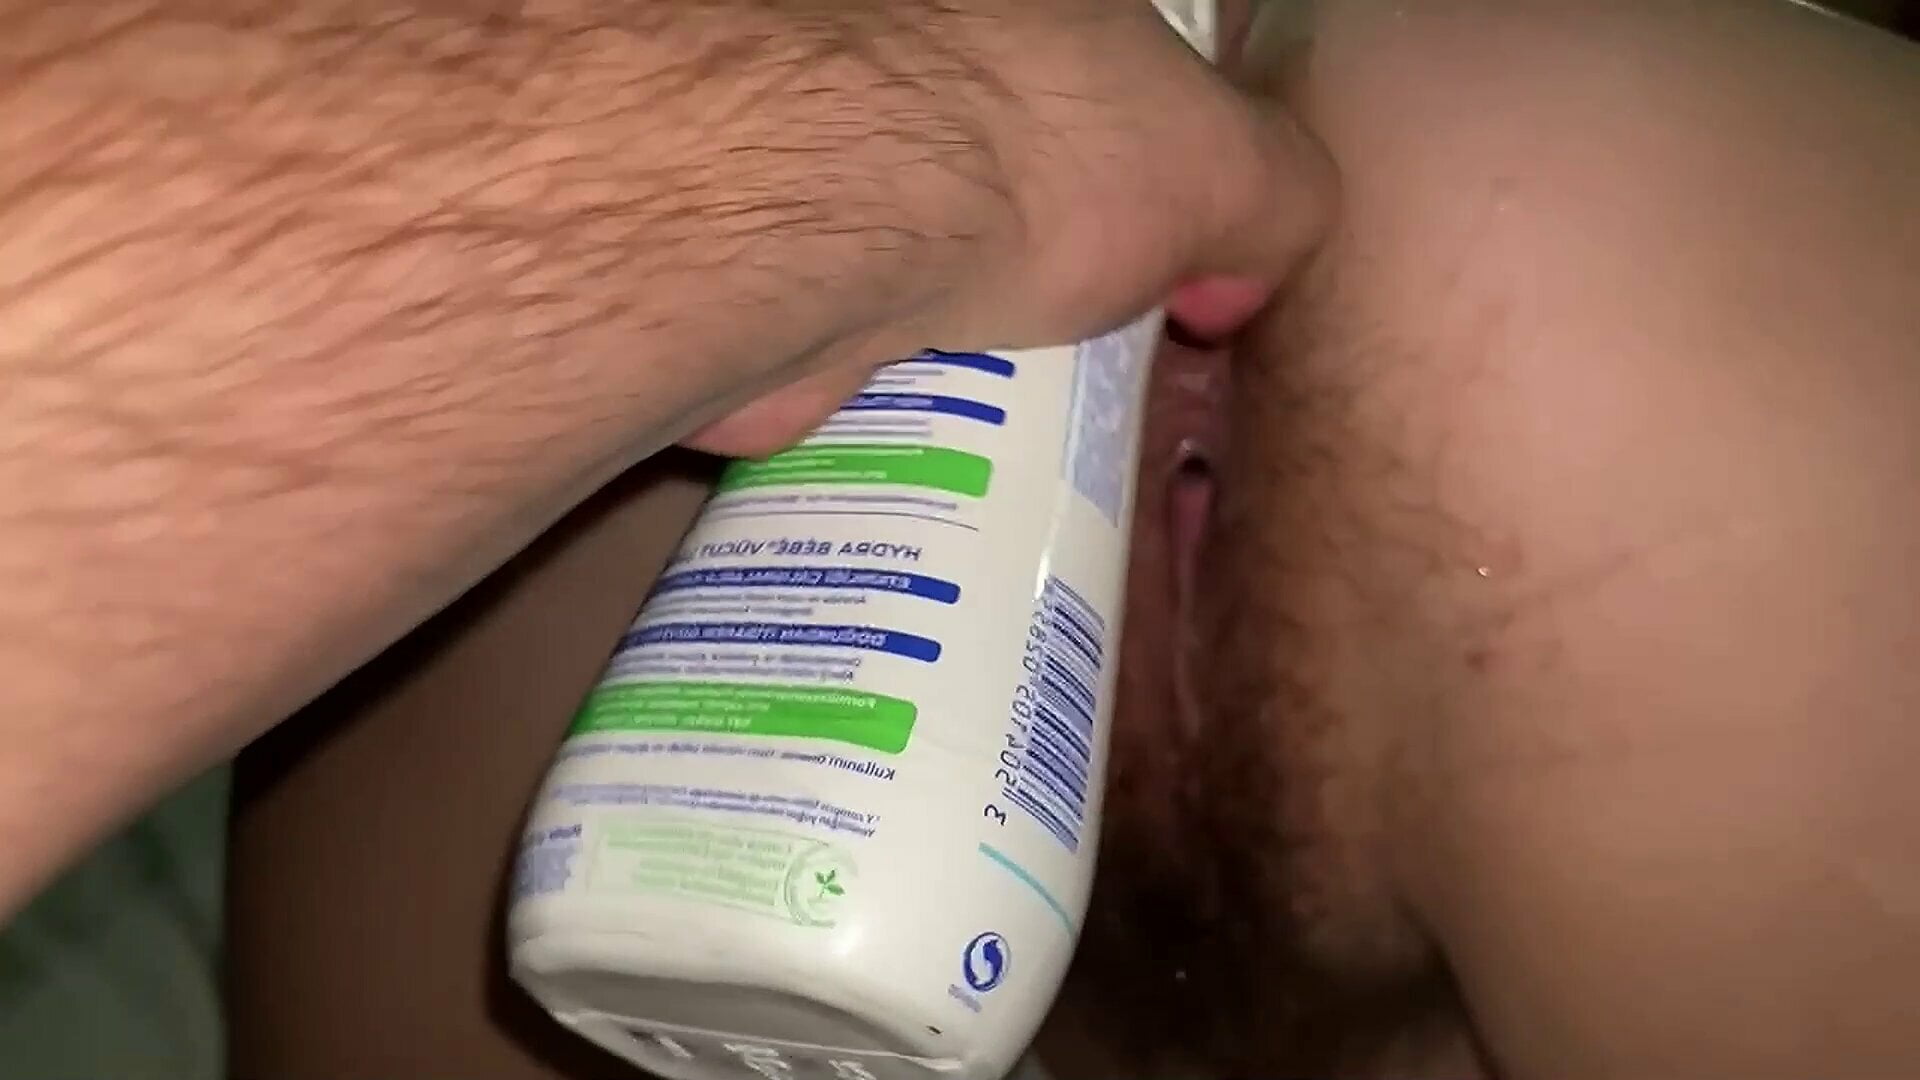 FISTING HAIRY ANUS FOR SQUIRTING ORGASM. AMATEUR POV ANAL SQUIRT.